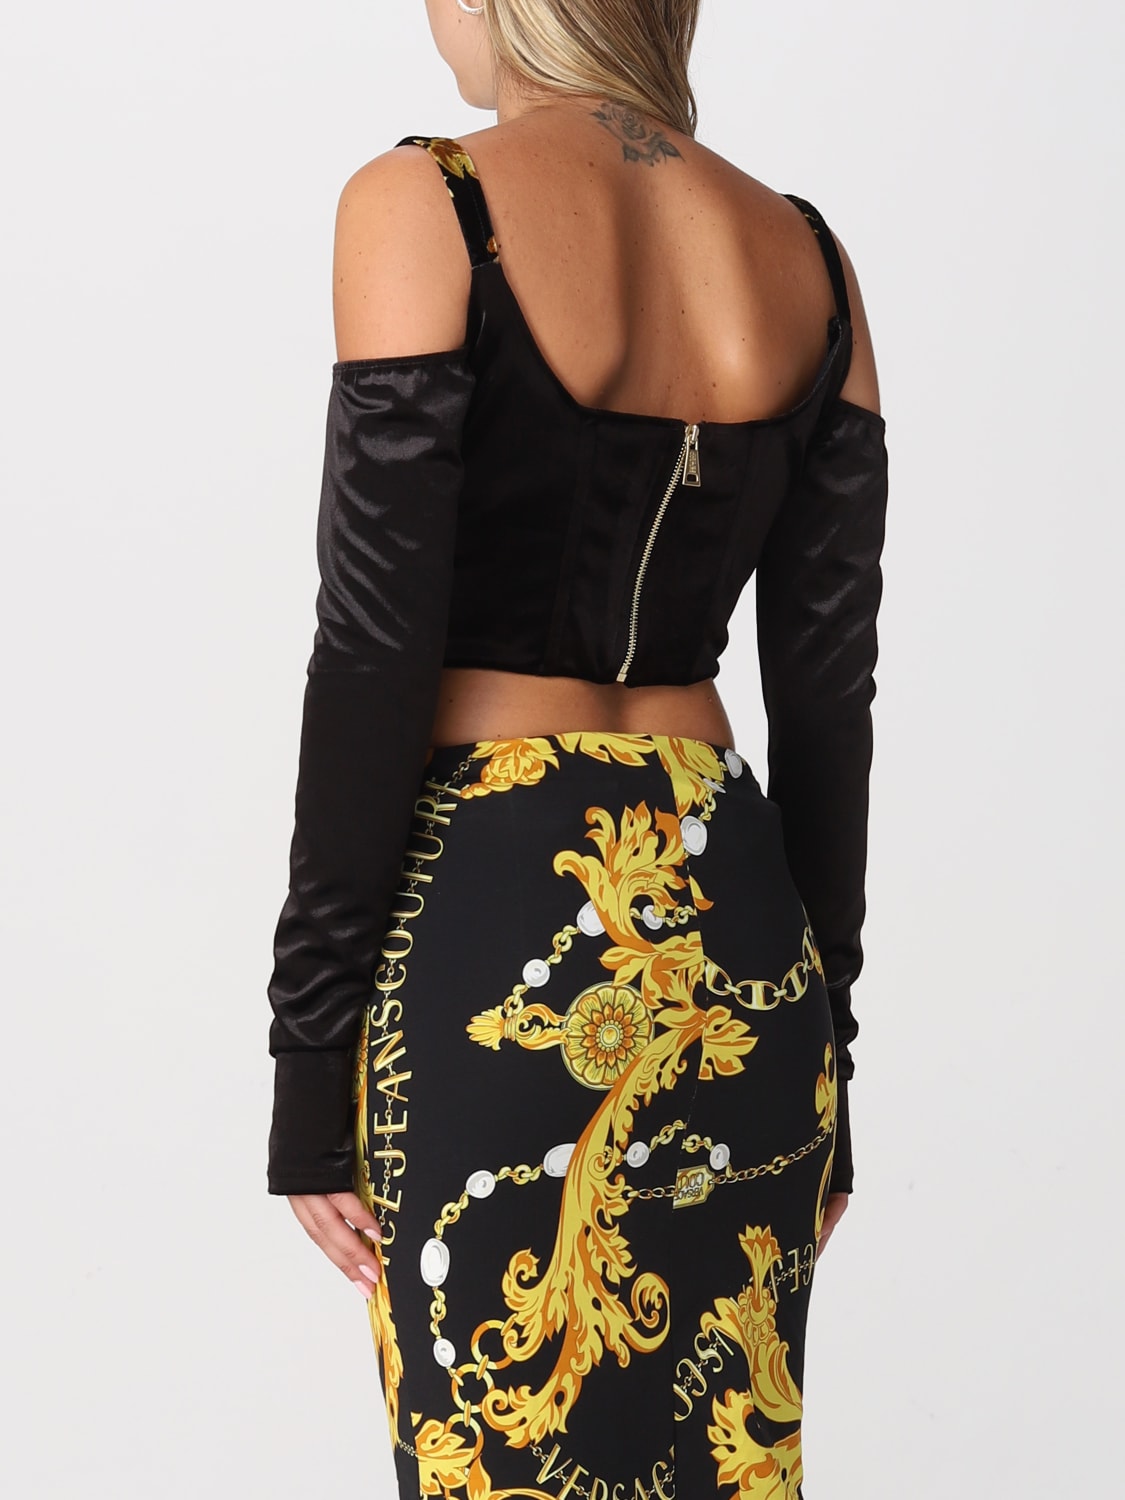 VERSACE JEANS COUTURE：トップス レディース - ブラック | GIGLIO.COM